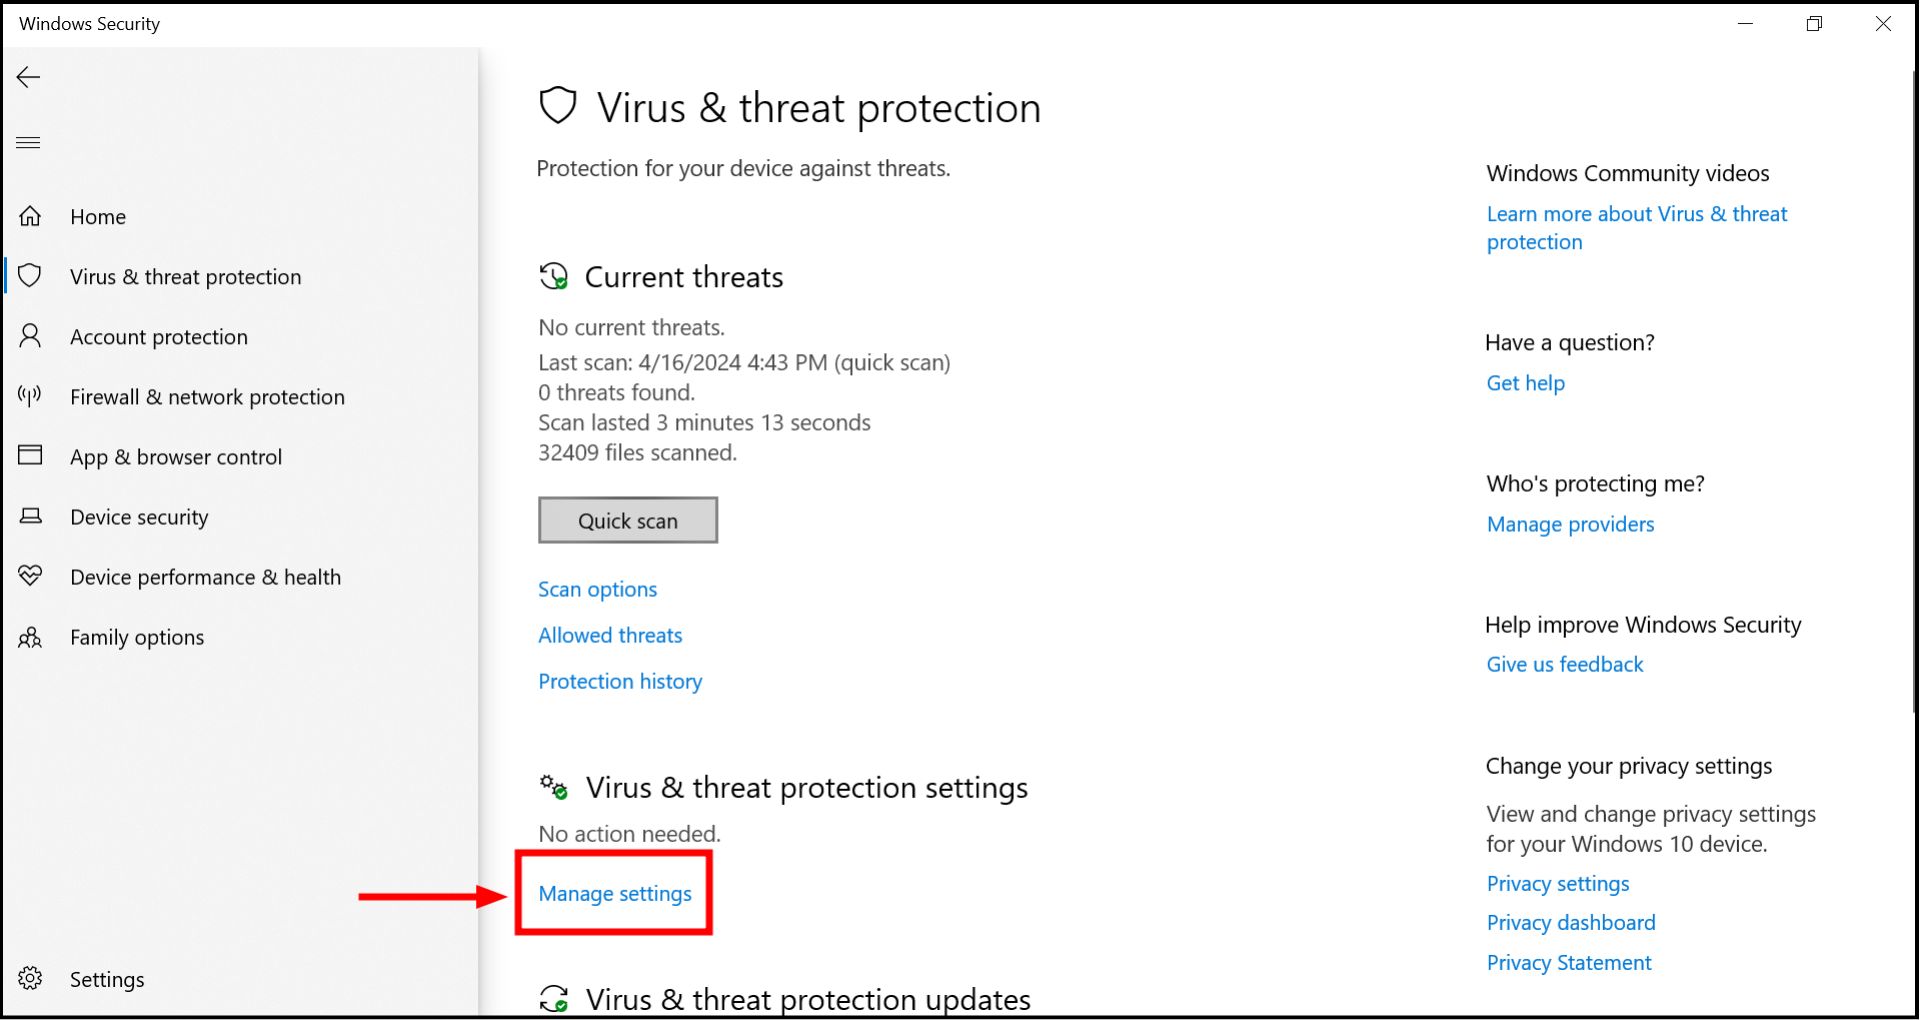 Click on Virus & threat protection settings